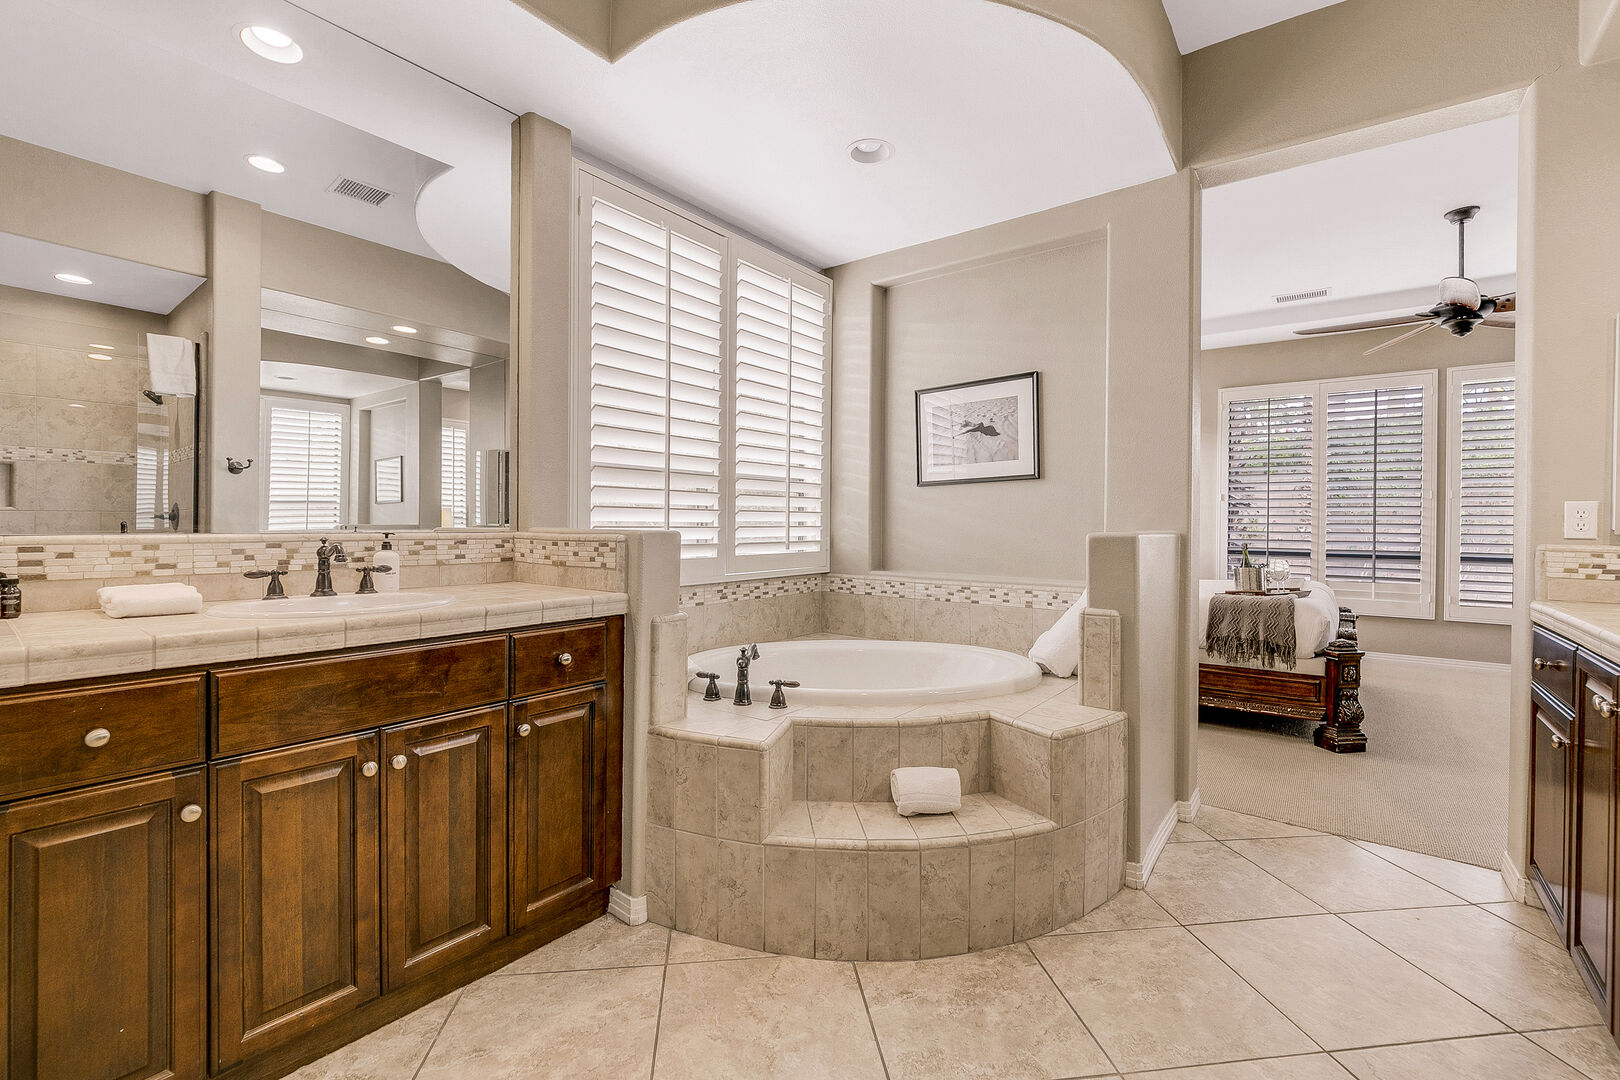 Relax your muscles in the perfectly placed bath tub.